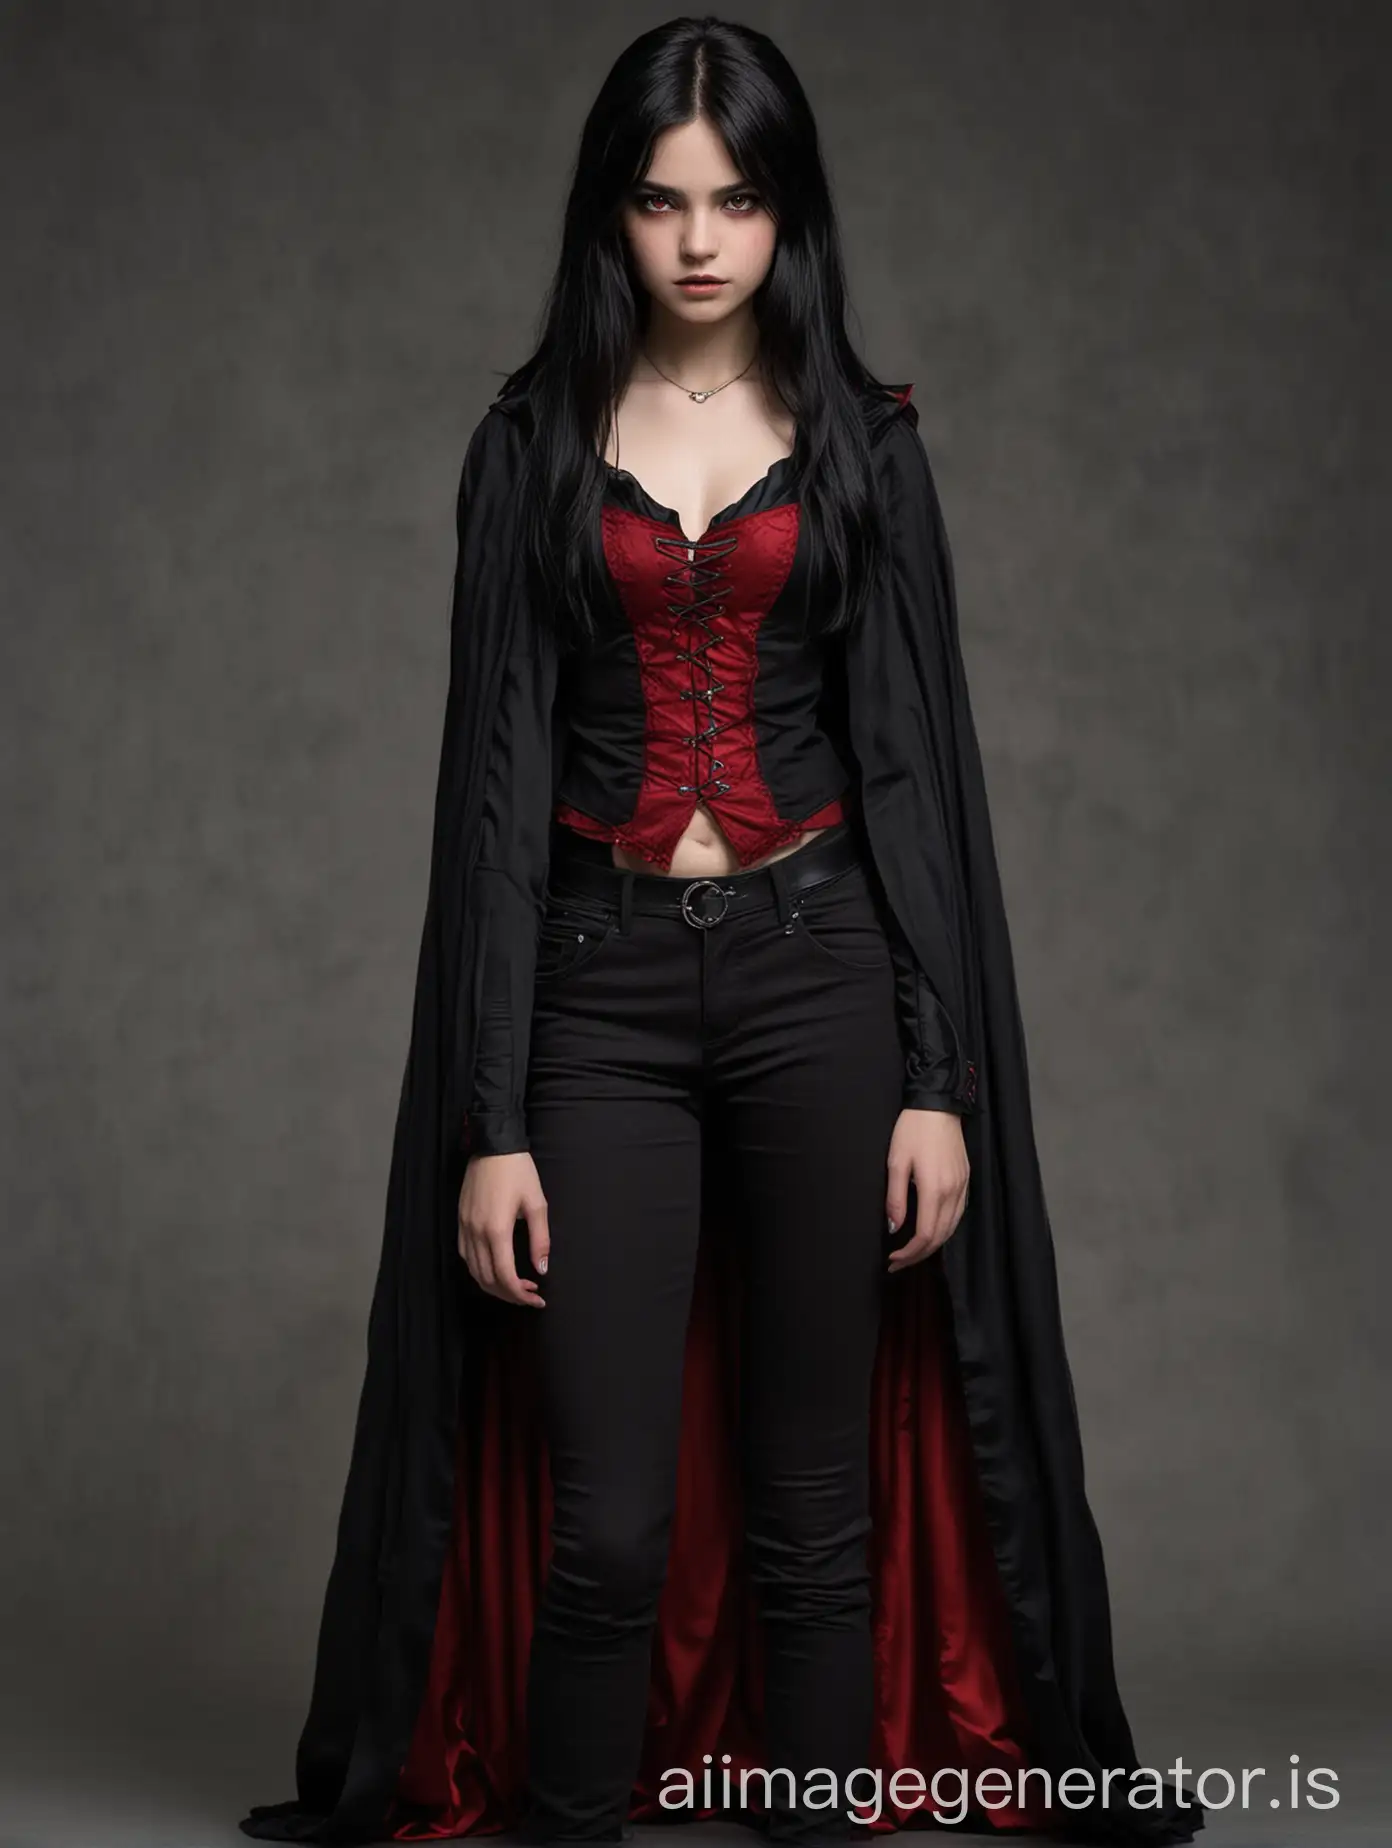 Mysterious-BlackHaired-Vampire-Teen-in-Elegant-Red-and-Black-Attire